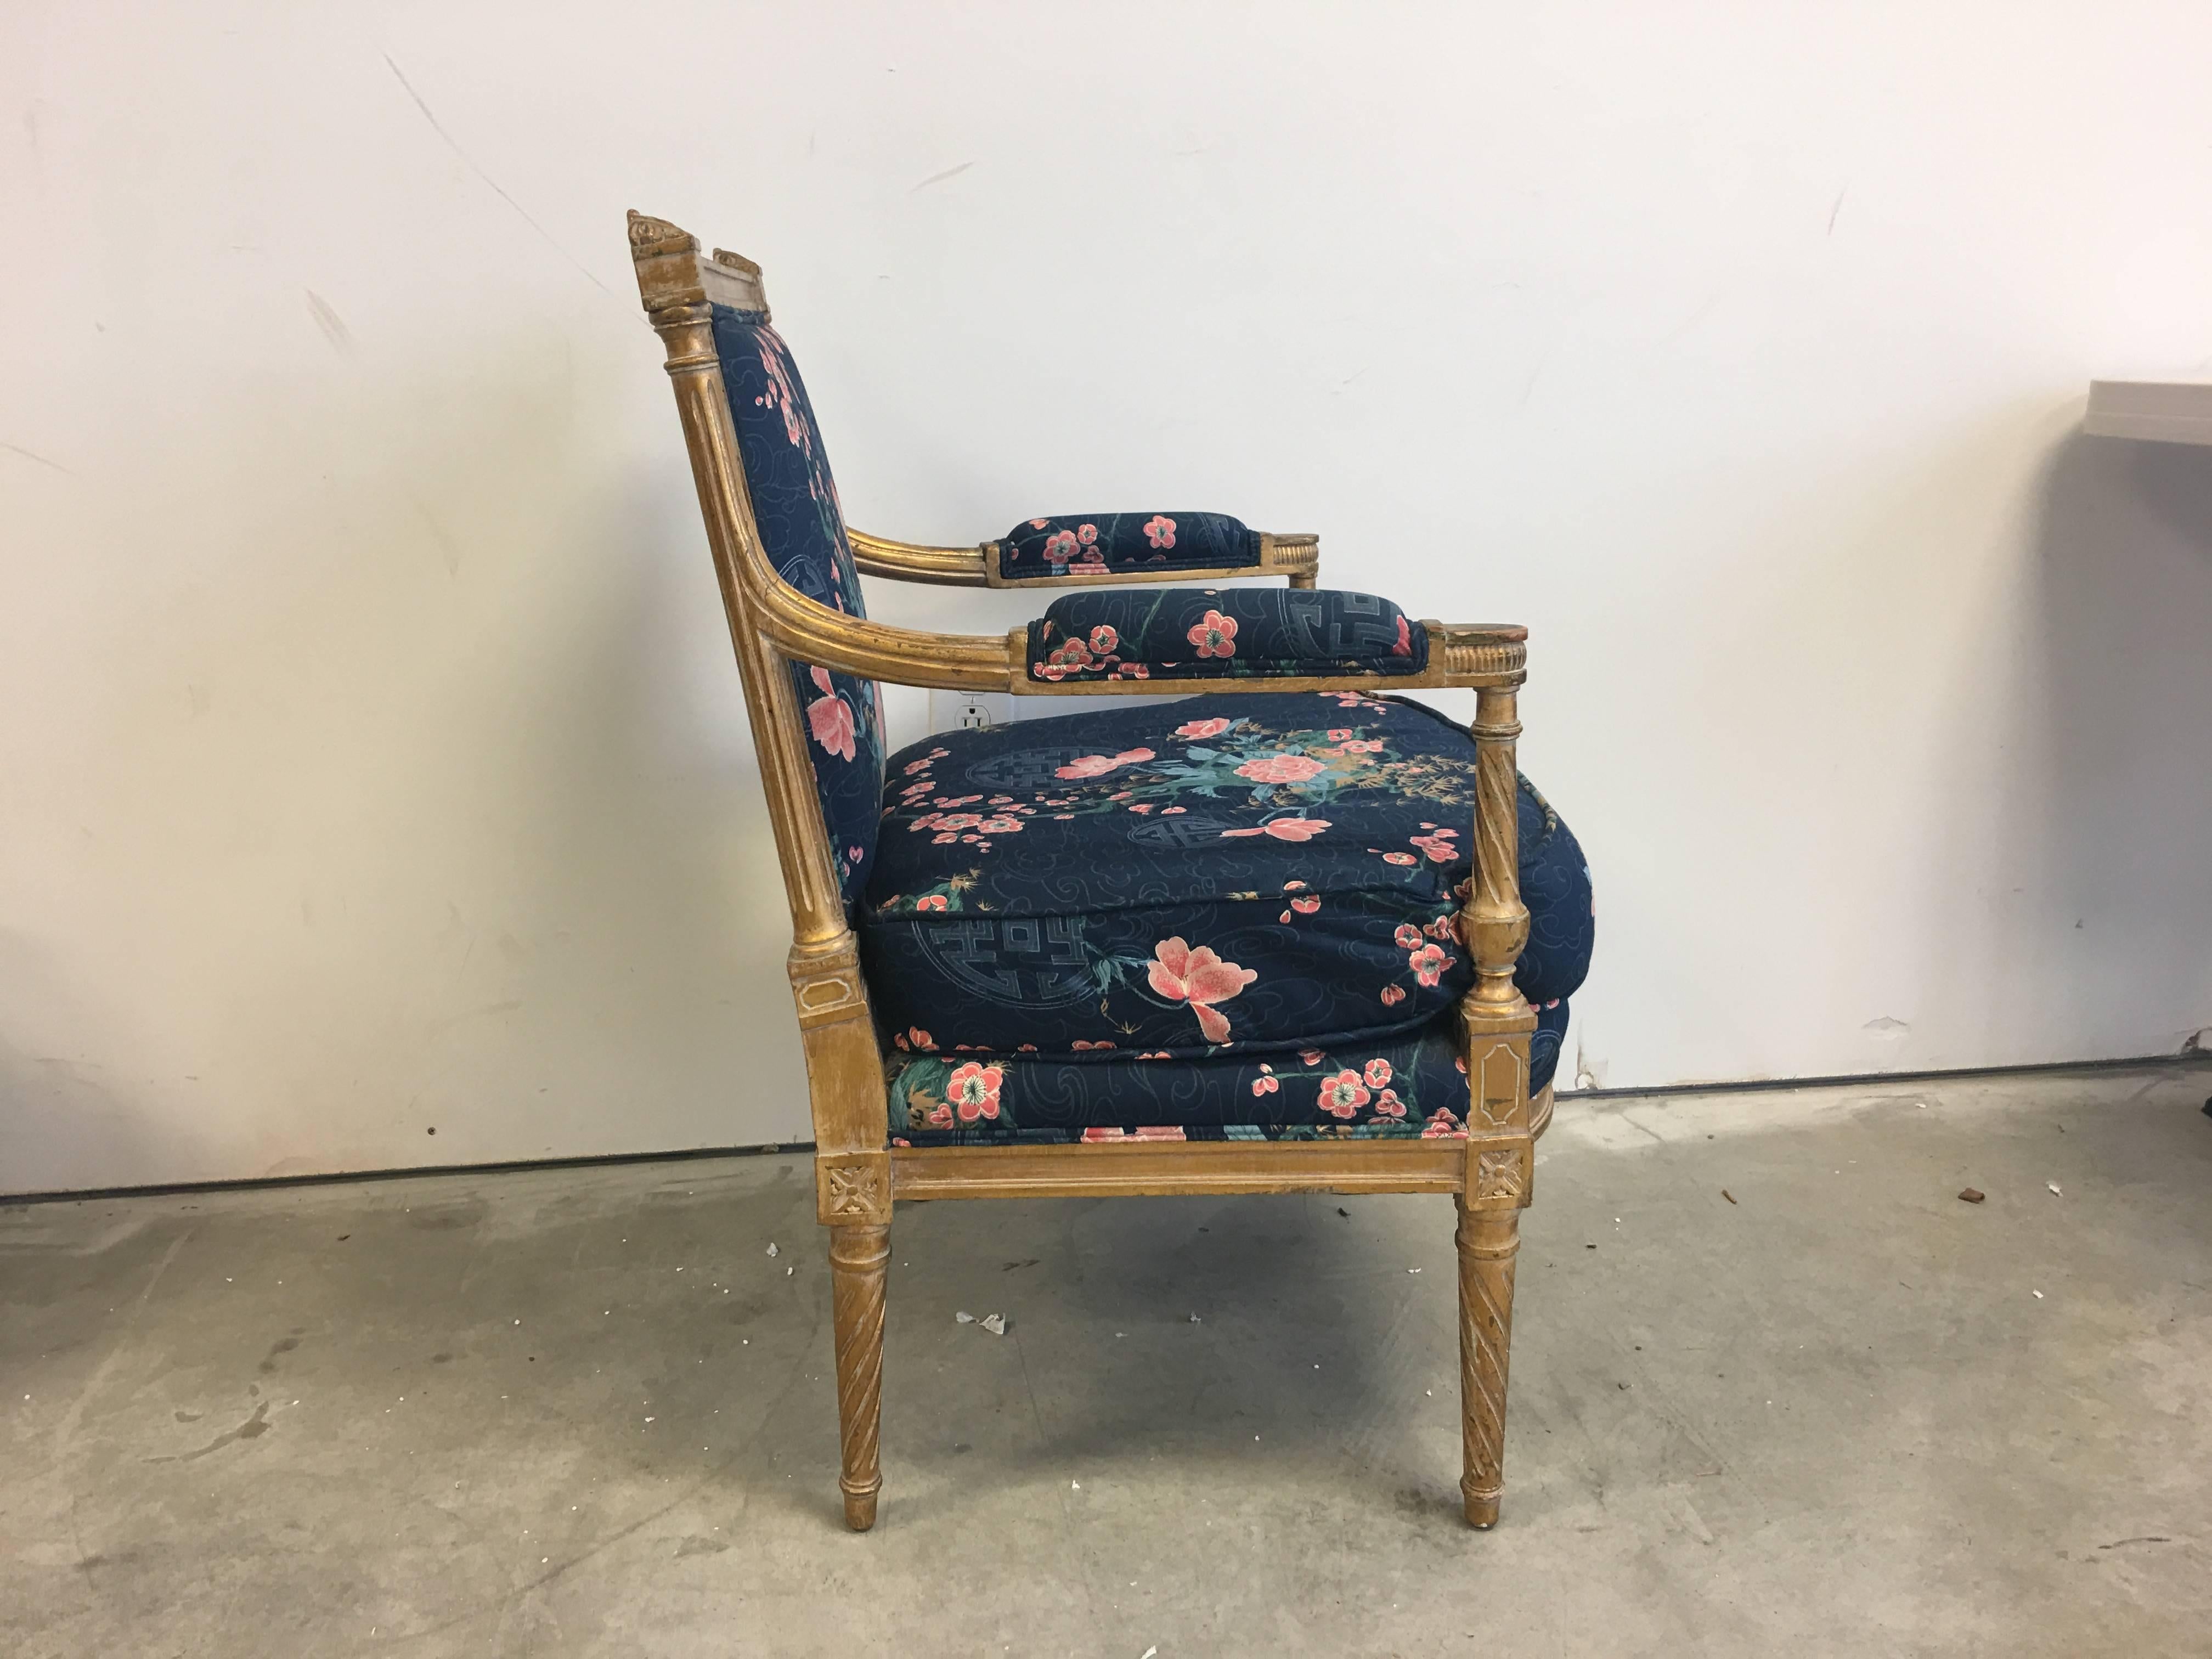 Fabric 1950s Chinoiserie Gilt Armchair with Navy Cherry Blossom Upholstery